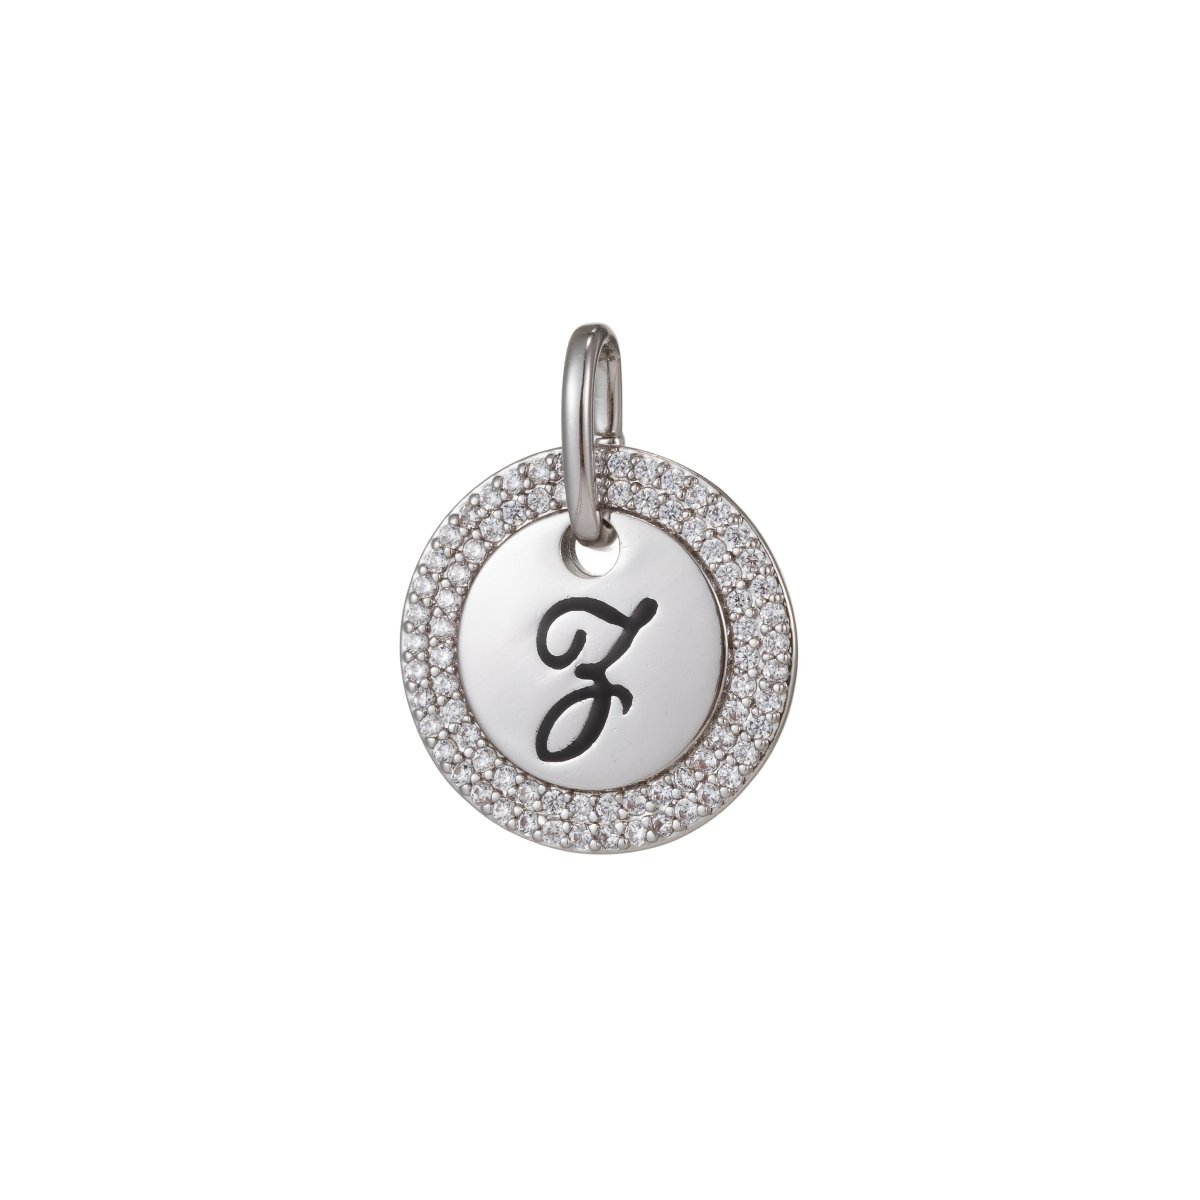 White Gold Filled Micro Pave CZ Initial Letters Pendant Charm, White Gold Filled Letter Pendant, For DIY Jewelry Necklace Making A-141 to A-153 - DLUXCA